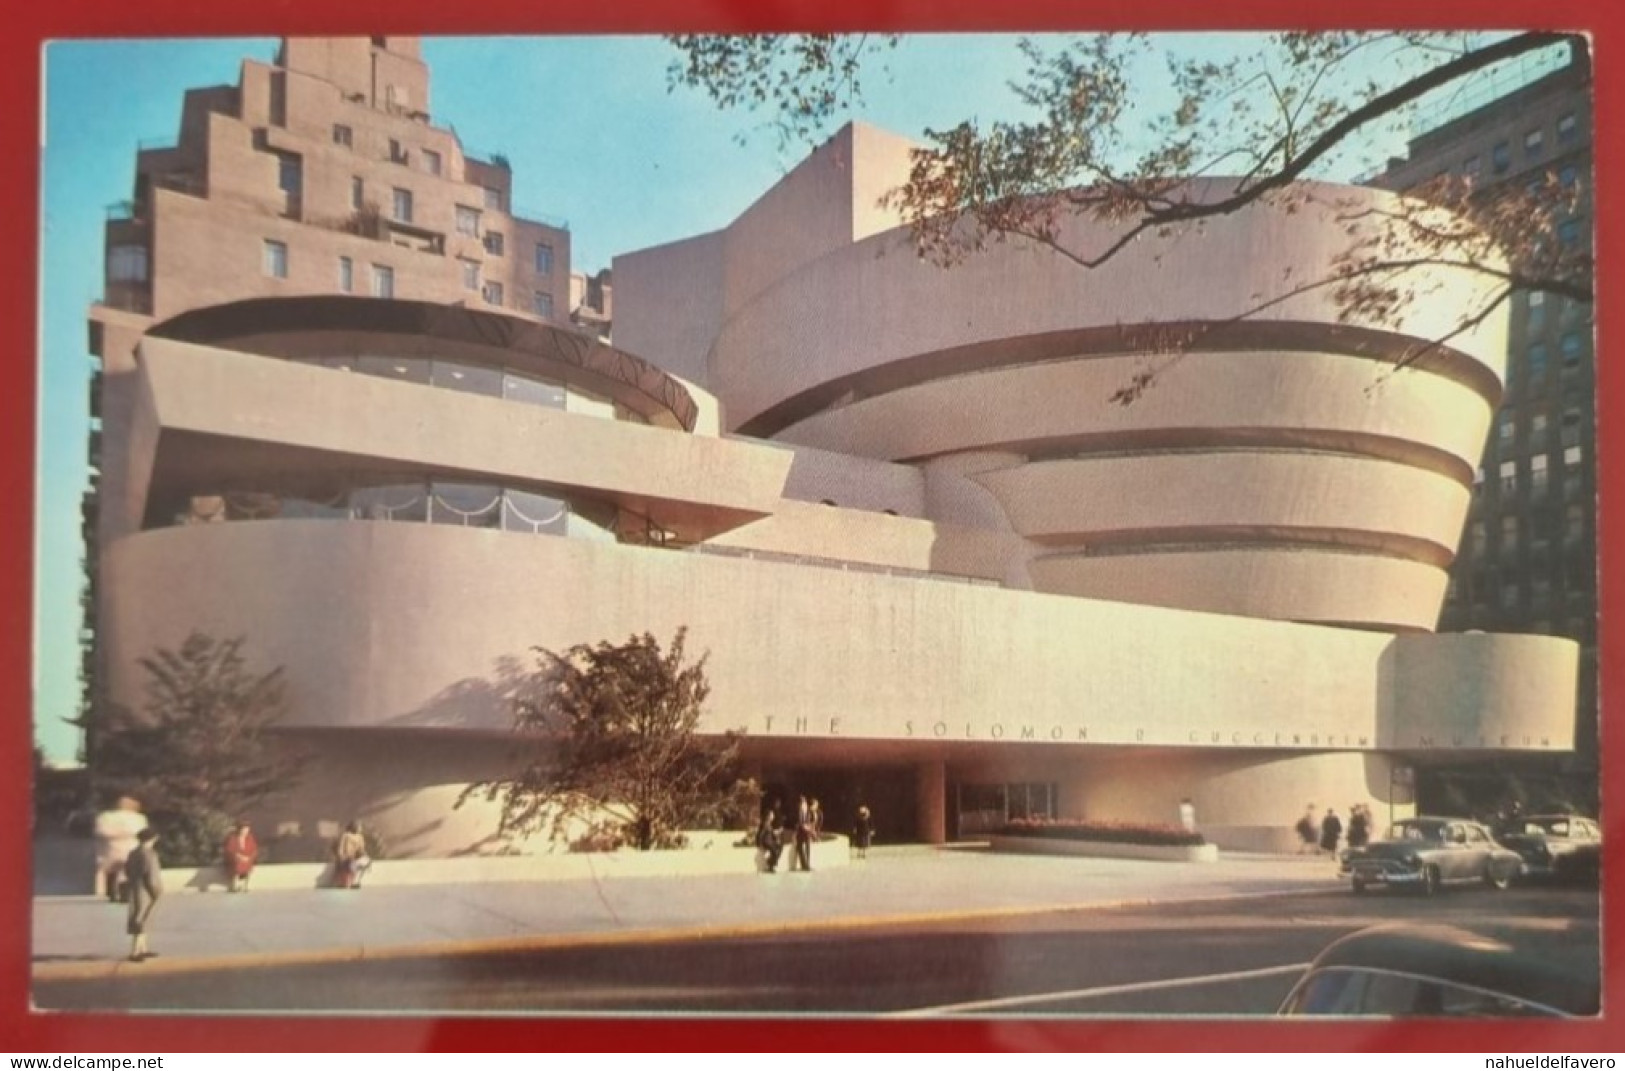 Uncirculated Postcard - USA - NY, NEW YORK CITY - THE SOLOMAN R. GUGGENHEIM MUSEUM - Museums